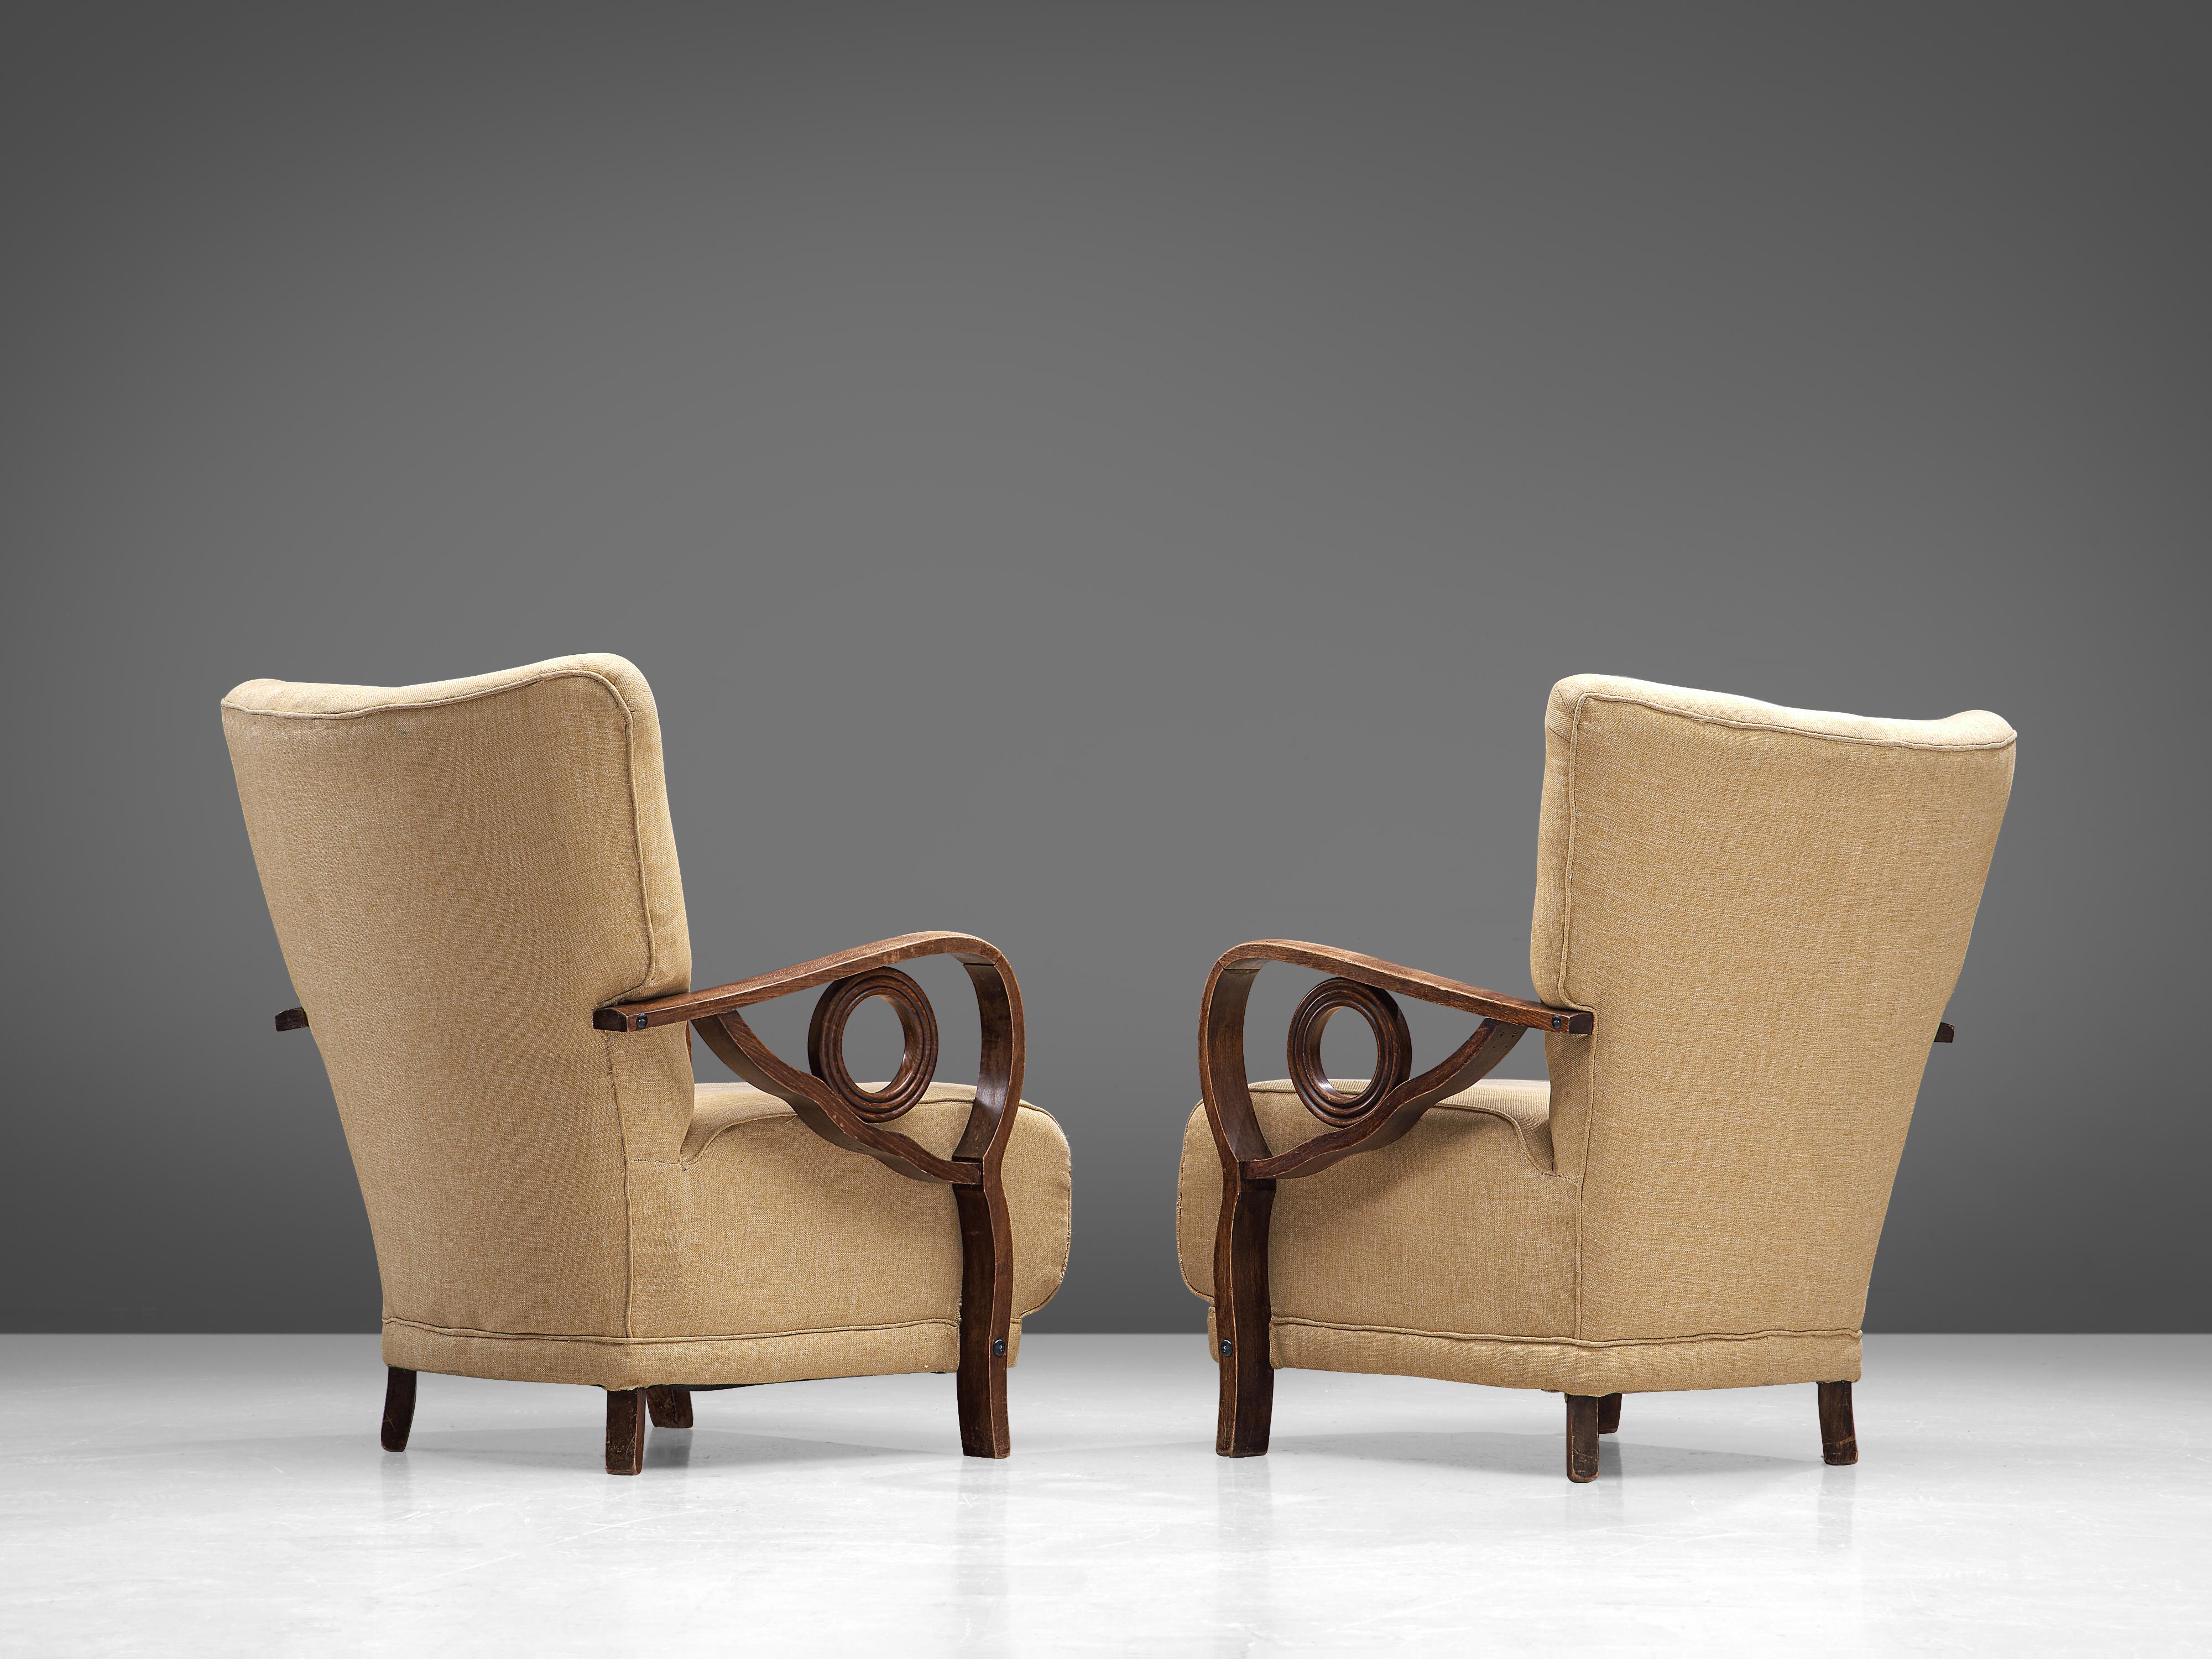 Pair of armchairs, oak, fabric, France, 1940s

The most distinctive feature of these Art Deco lounge chairs are the stained oak armrests that are curved with elegant details, such as the circular element in each arm. The seat is wide and the